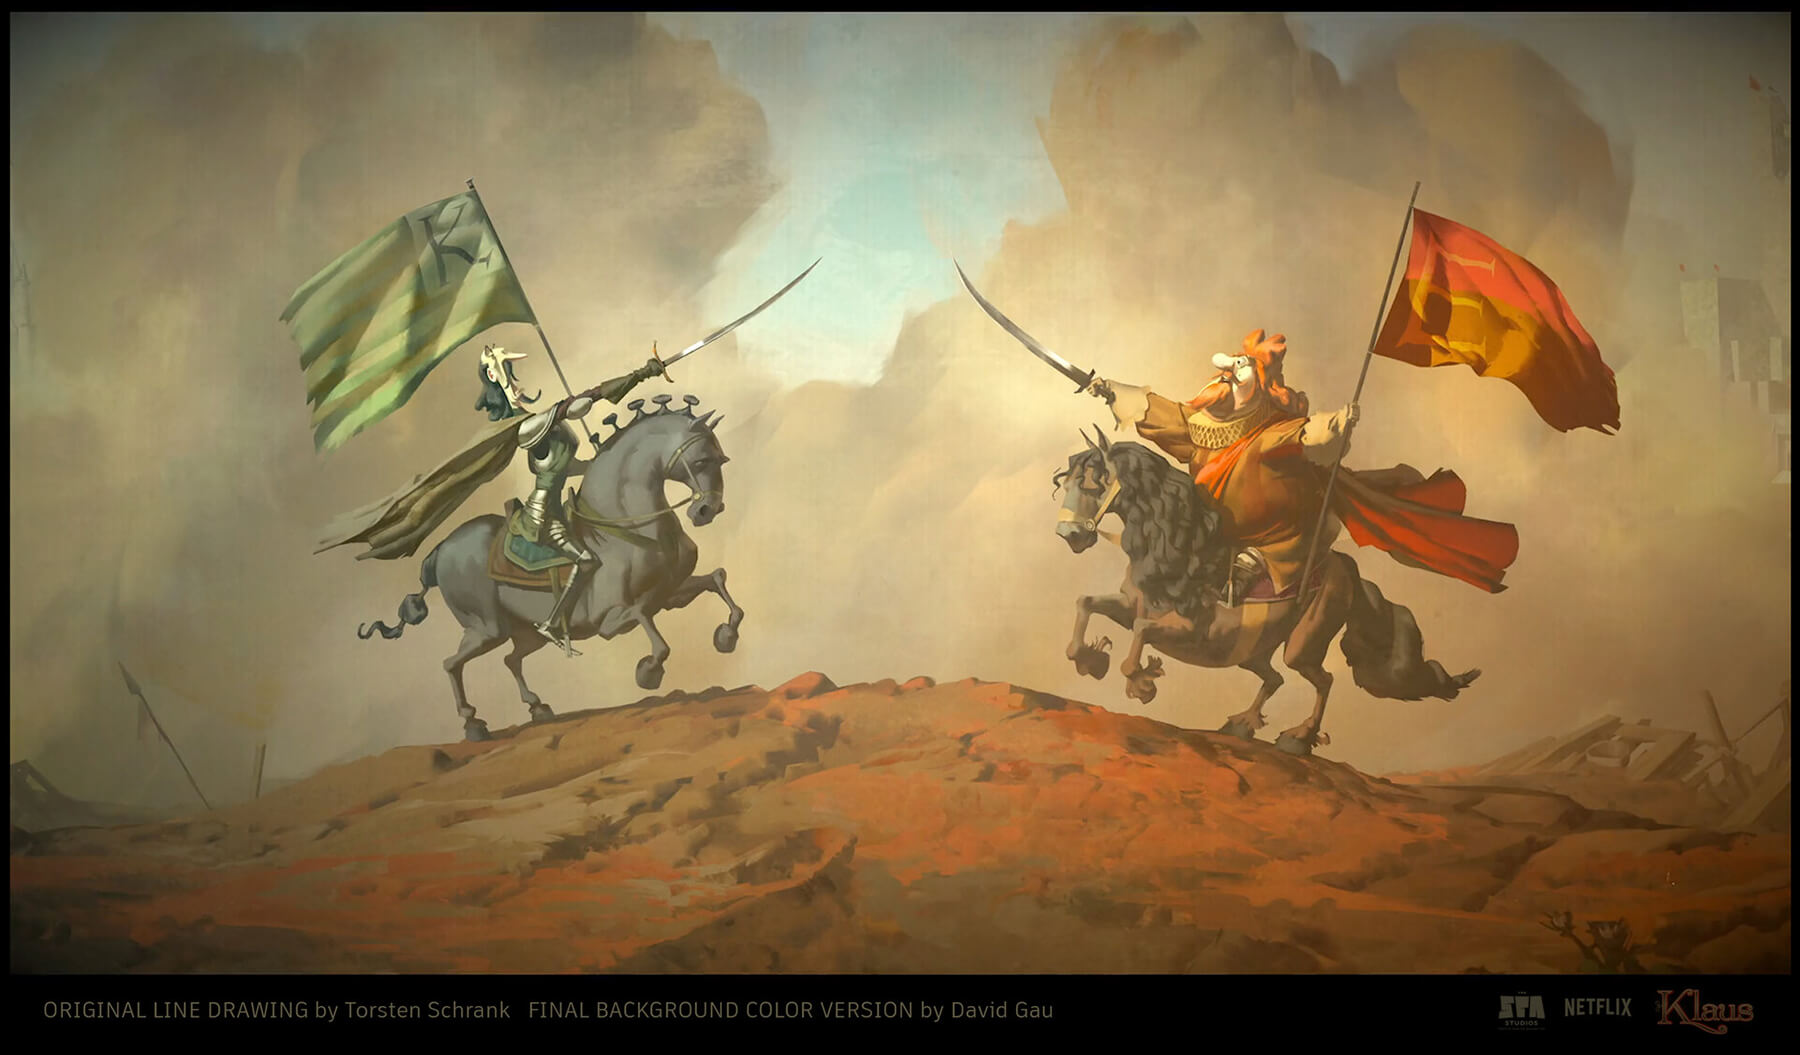  baroque-style painting of two mounted horsemen with swords and banners, facing off on a battlefield.